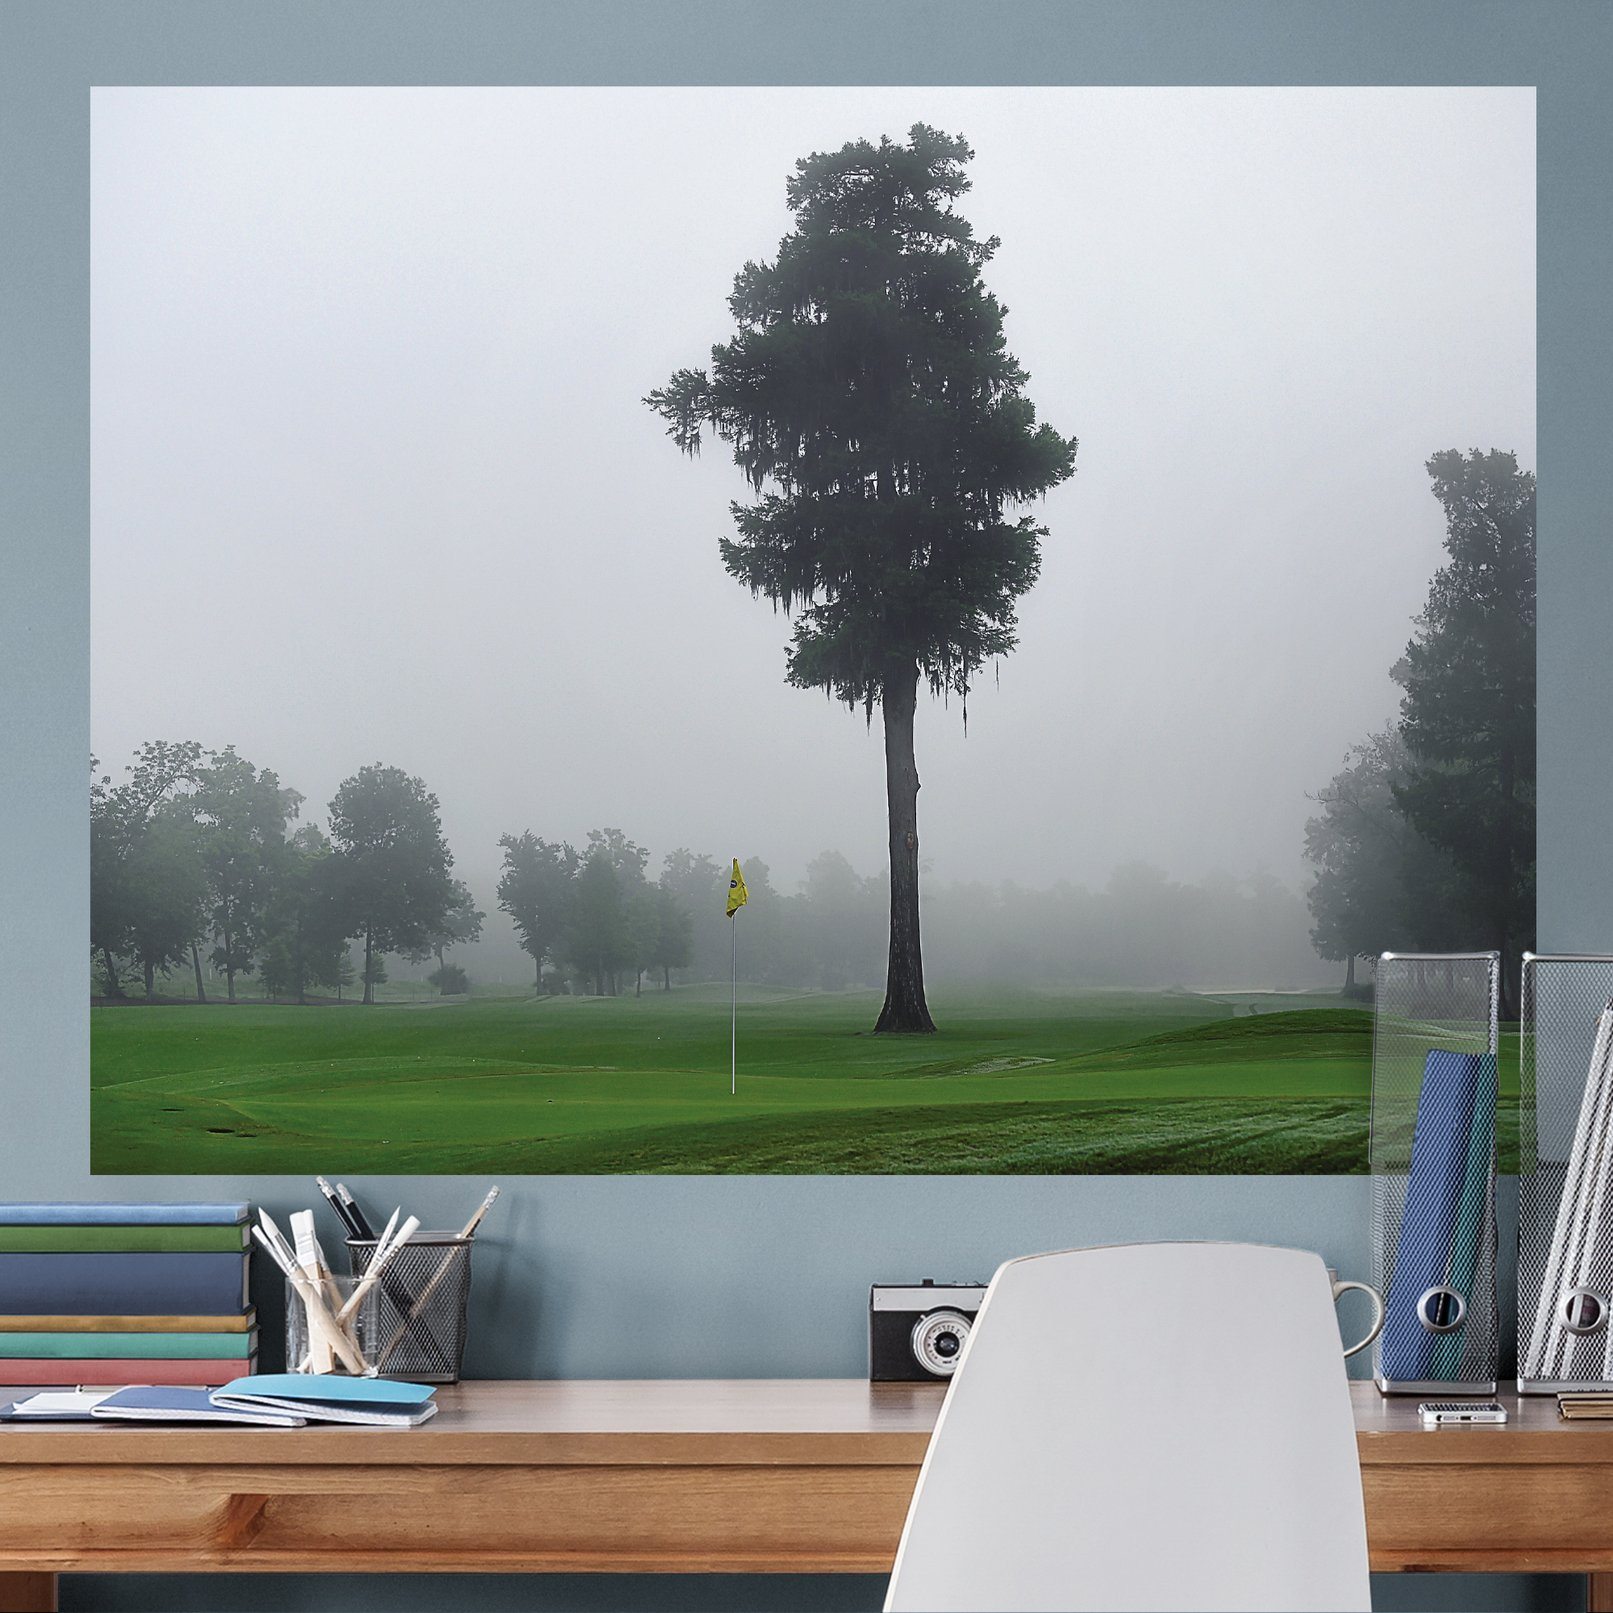 https://fathead.com/collections/golf/products/1025-00040